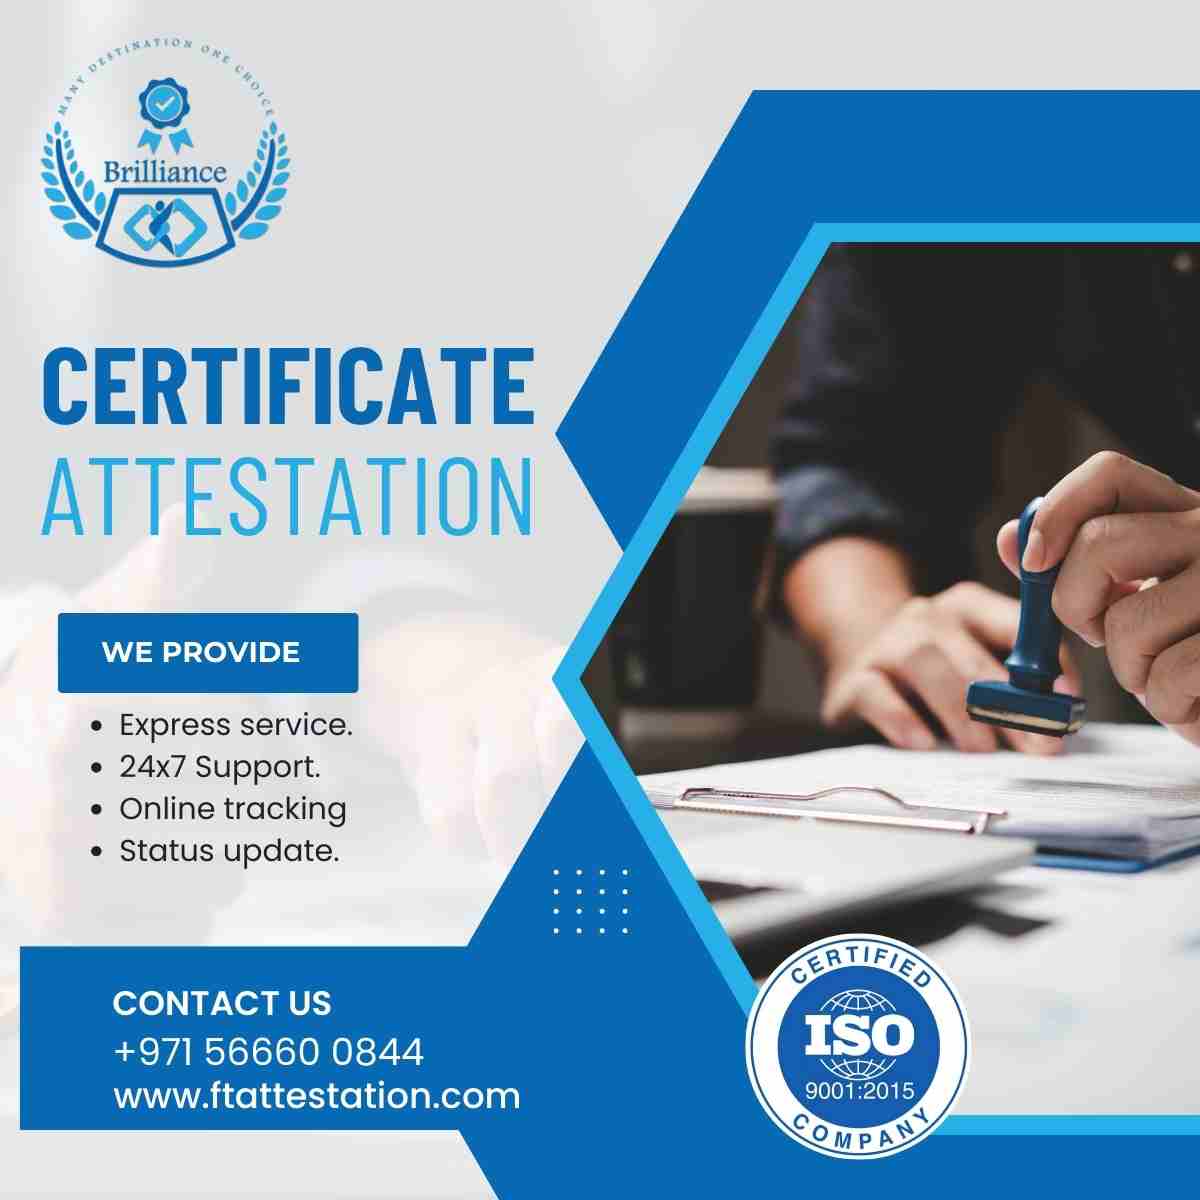 Complete Certificate Attestation Services In Gulf Countries